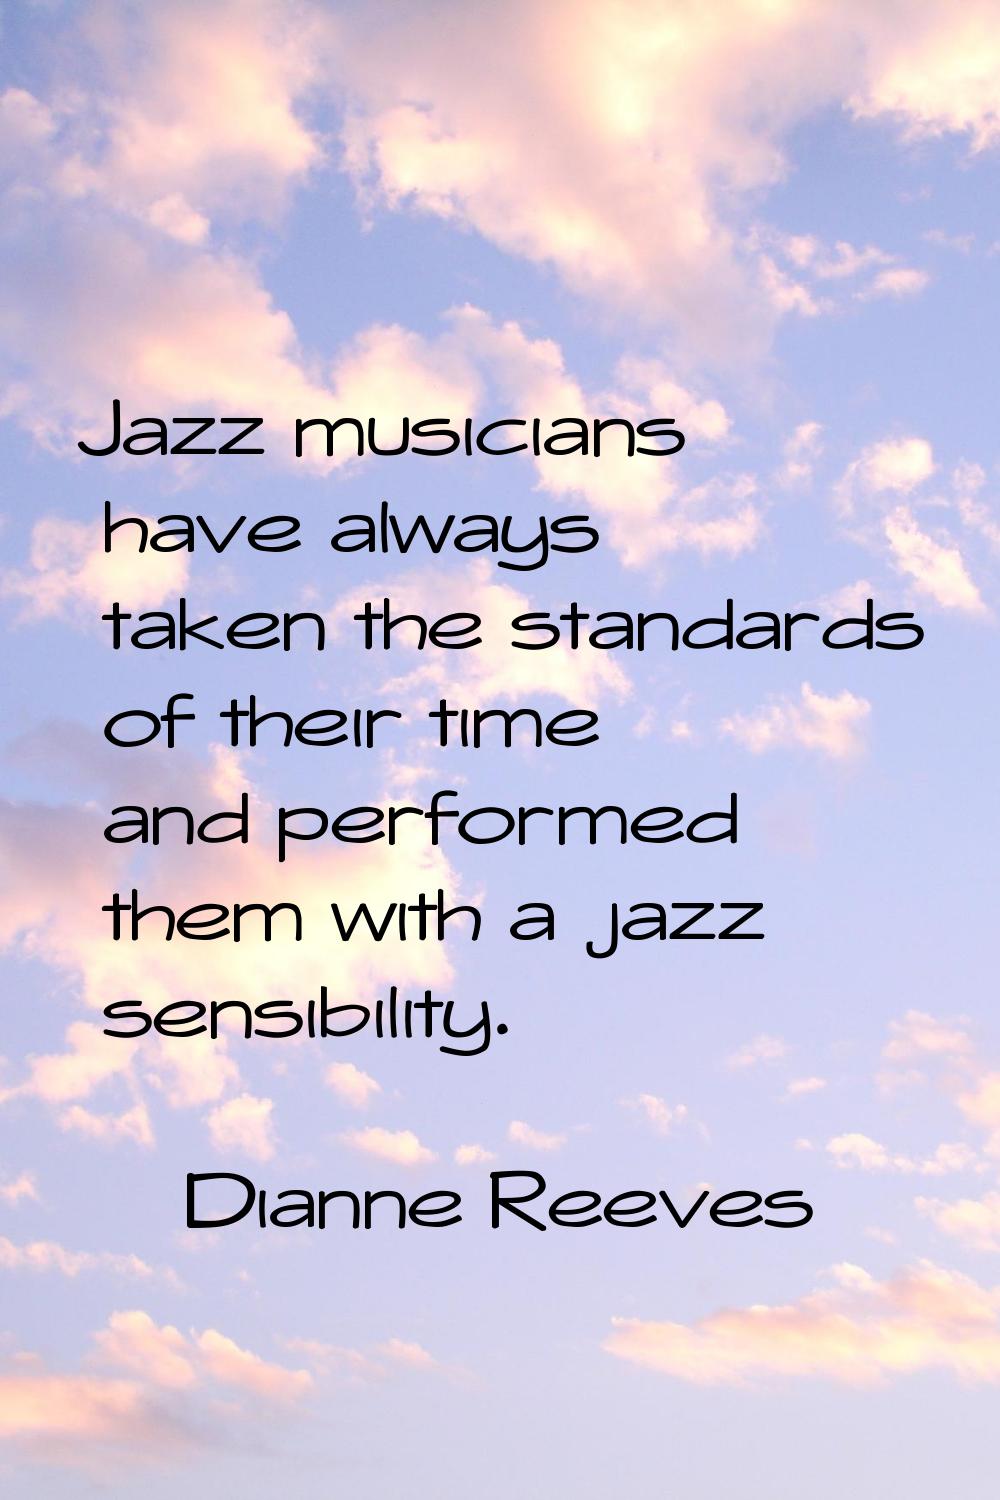 Jazz musicians have always taken the standards of their time and performed them with a jazz sensibi